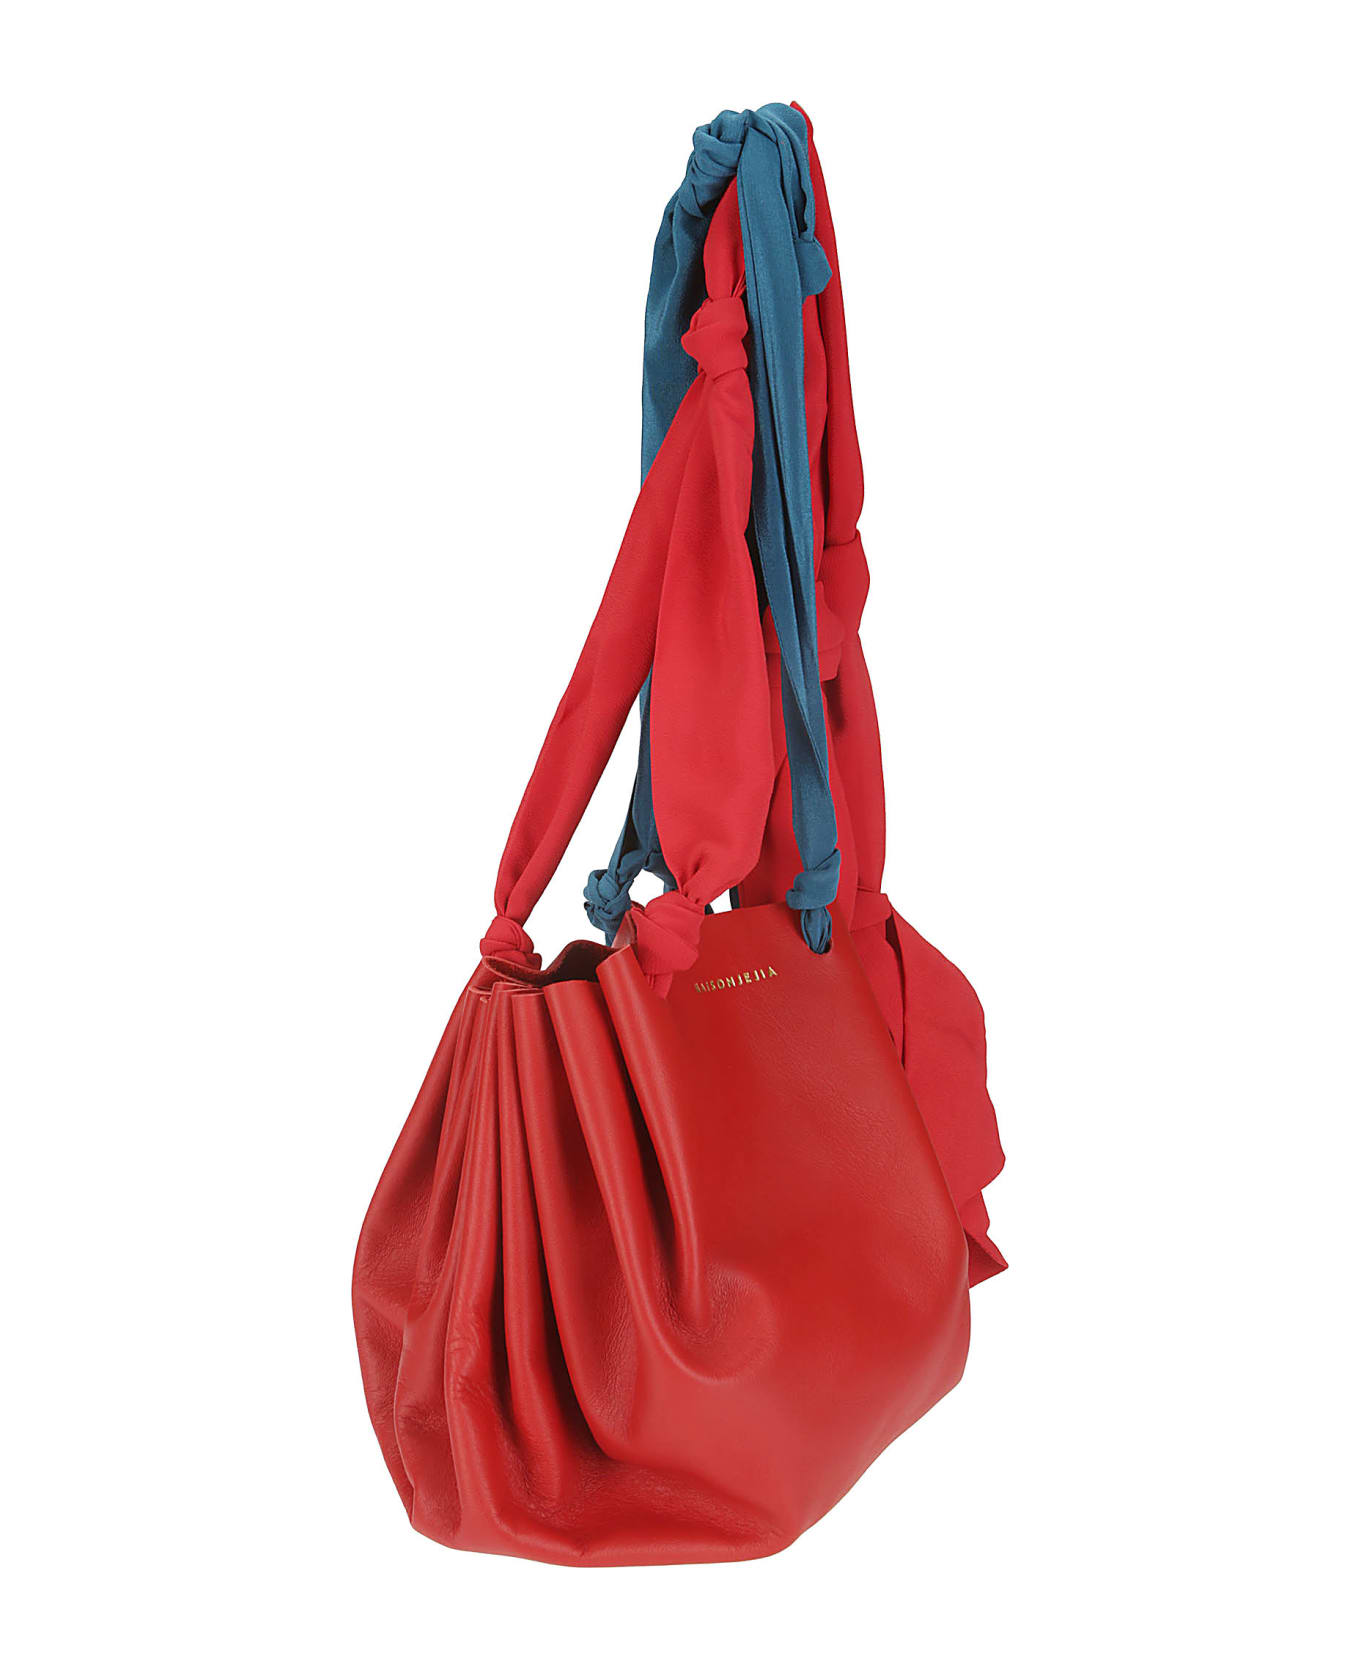 Jejia Bloom Baby Bag - RED LEATHER A1COTTON SILK トートバッグ